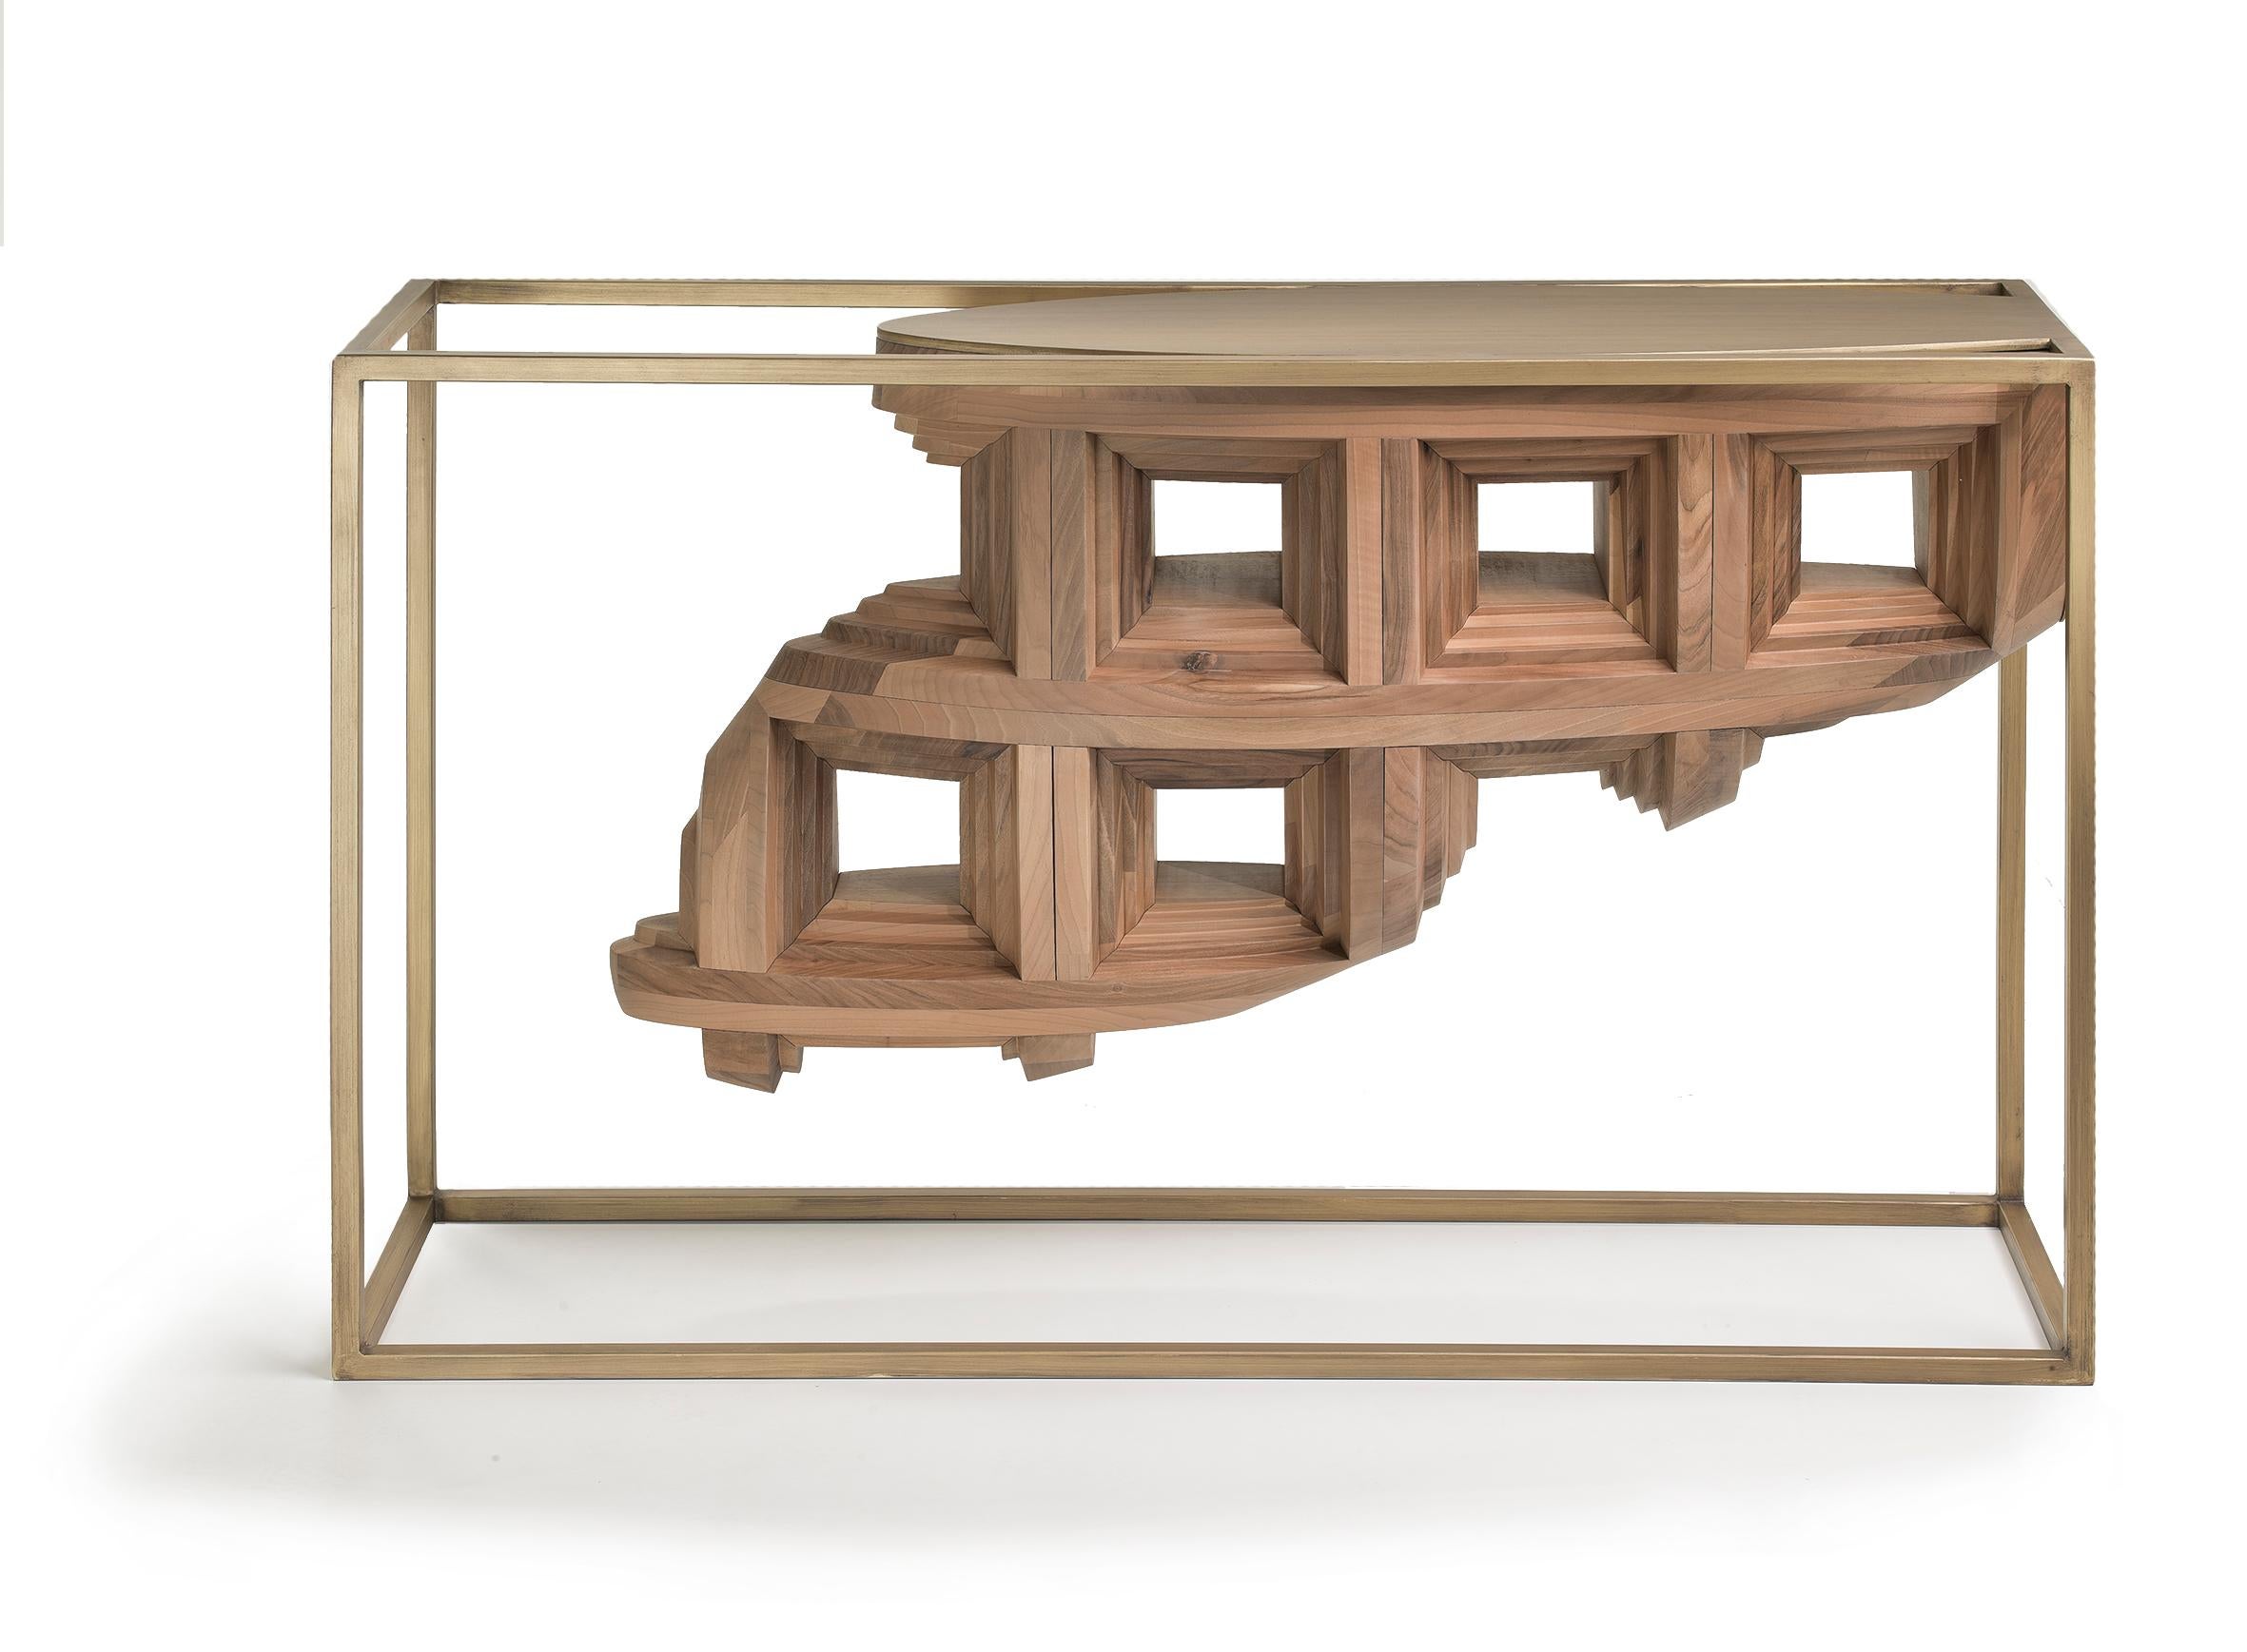 The supporting bronzed metal frame of the Rebus console is a testament to geometric elegance—a rectangular parallelogram that cradles within it a wooden asymmetrical, organically shaped fragment. It's as if a museum display case has come to life,